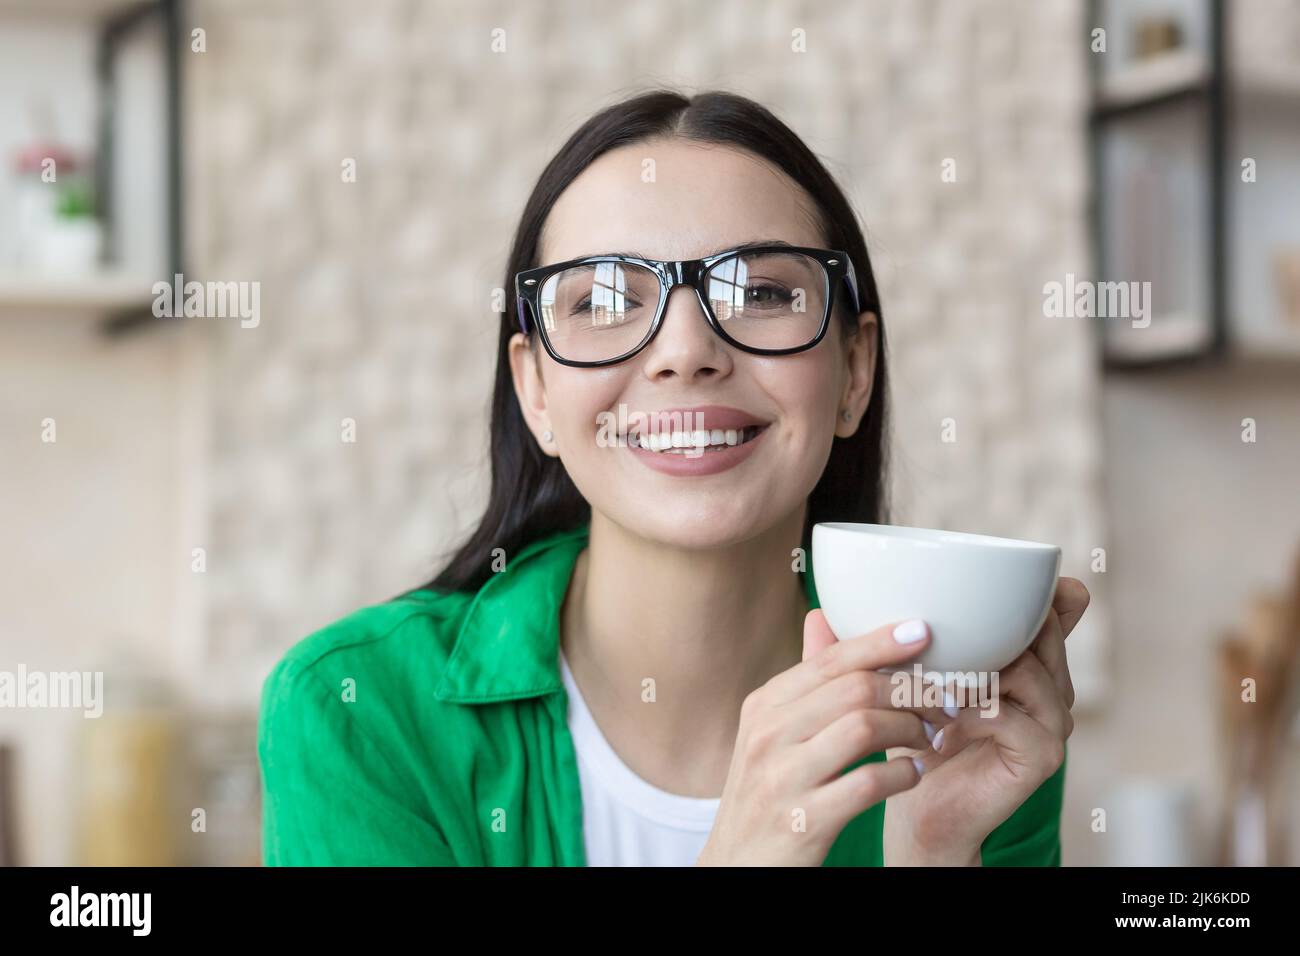 Close-up photo portrait of a young beautiful woman in glasses, holding and drinking a hot drink in the morning, smiling and looking out the window Stock Photo